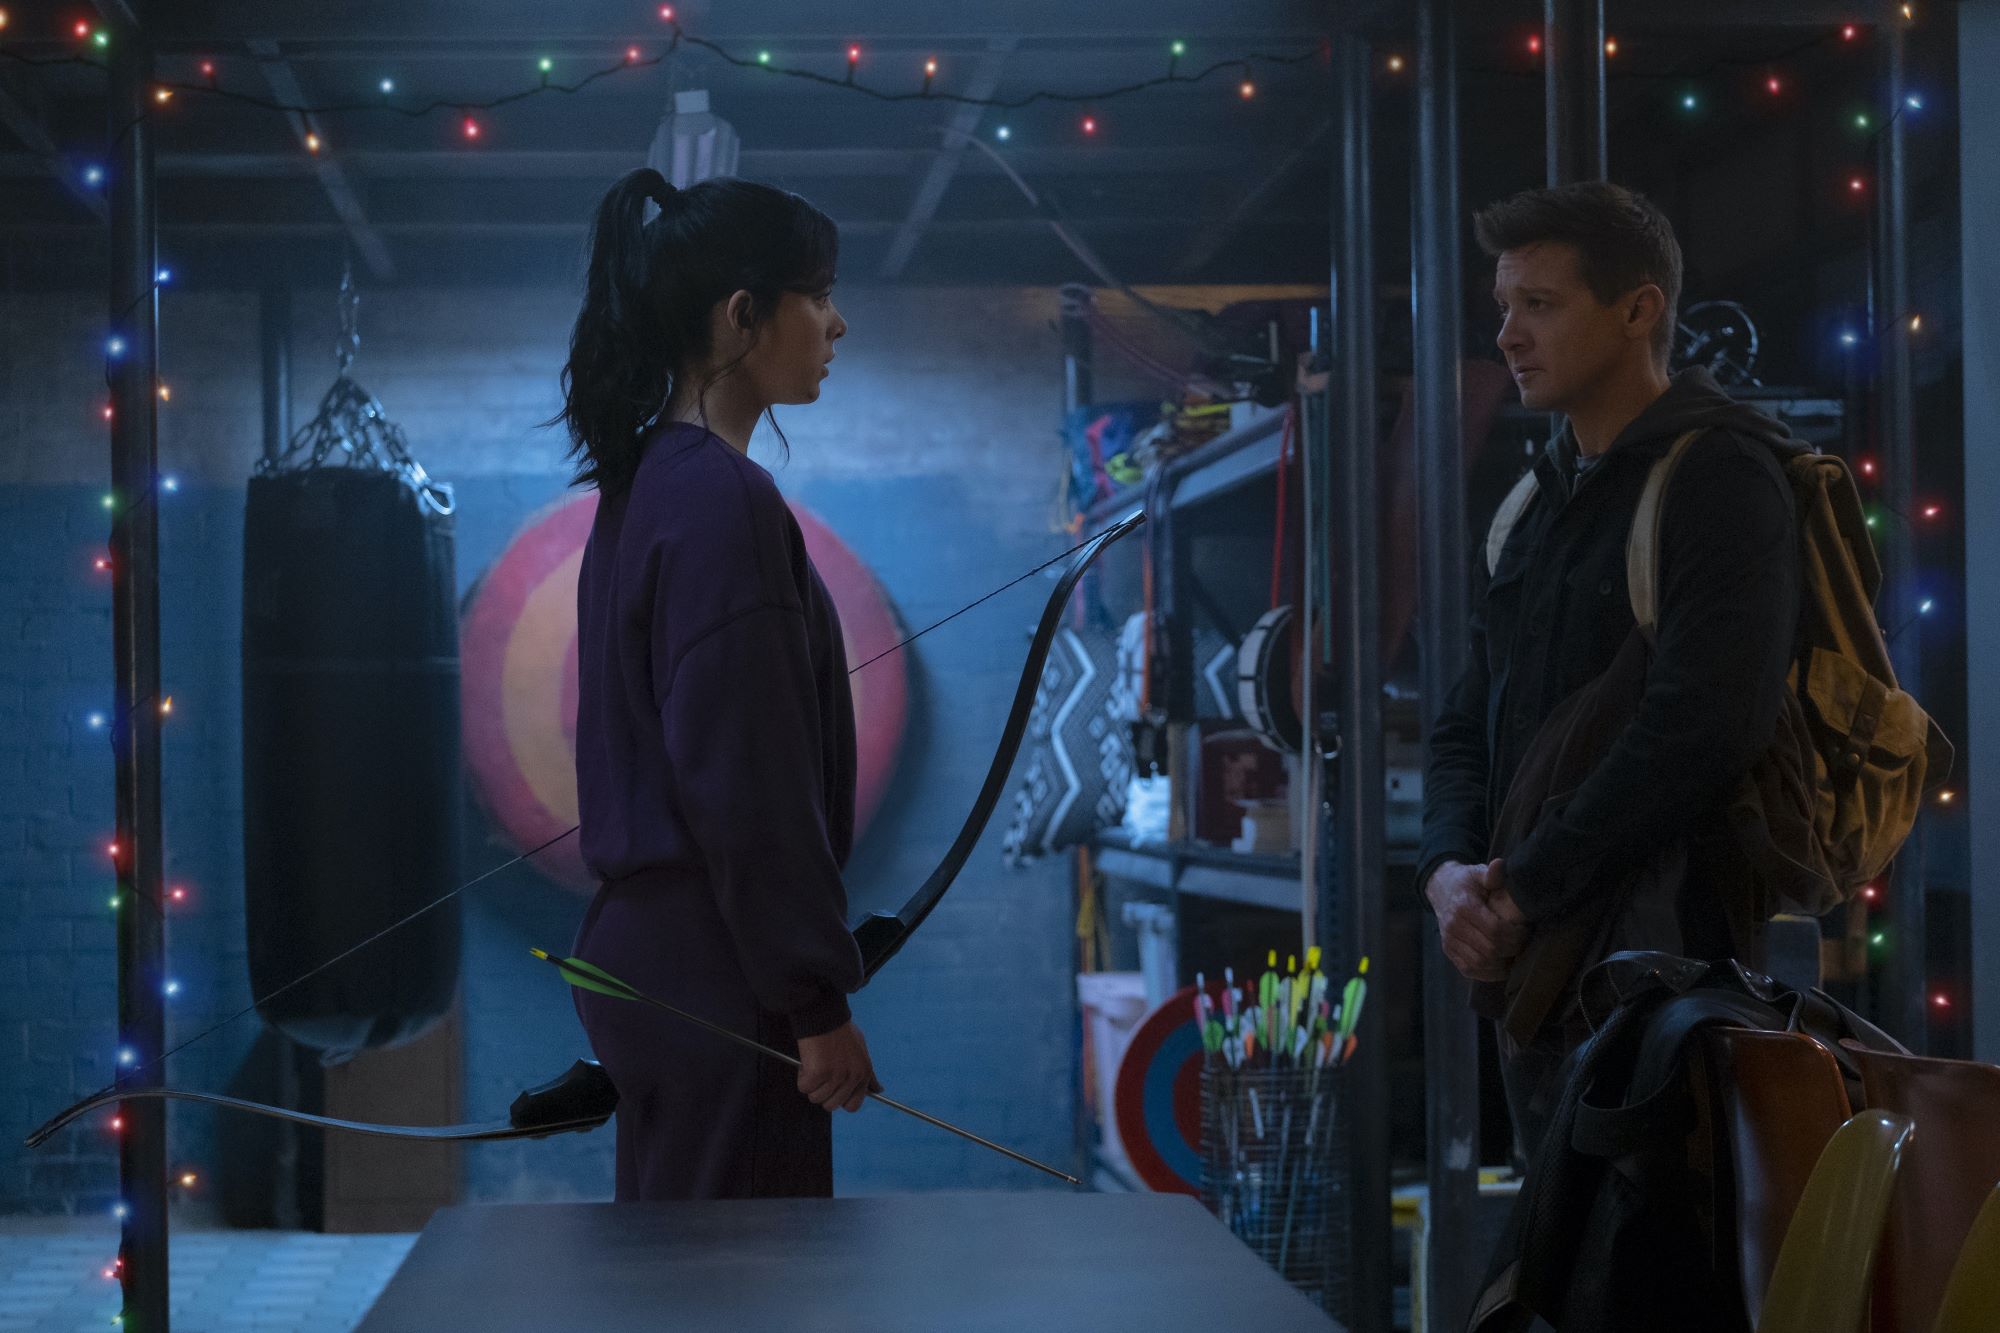 Marvel's 'Hawkeye' stars Hailee Steinfeld and Jeremy Renner, in character as Kate Bishop and Clint Barton, stand in Kate's apartment. Kate wears a purple sweater and purple sweatpants and holds a bow and arrow. Clint wears a dark coat and has a tan backpack slung over his shoulders.